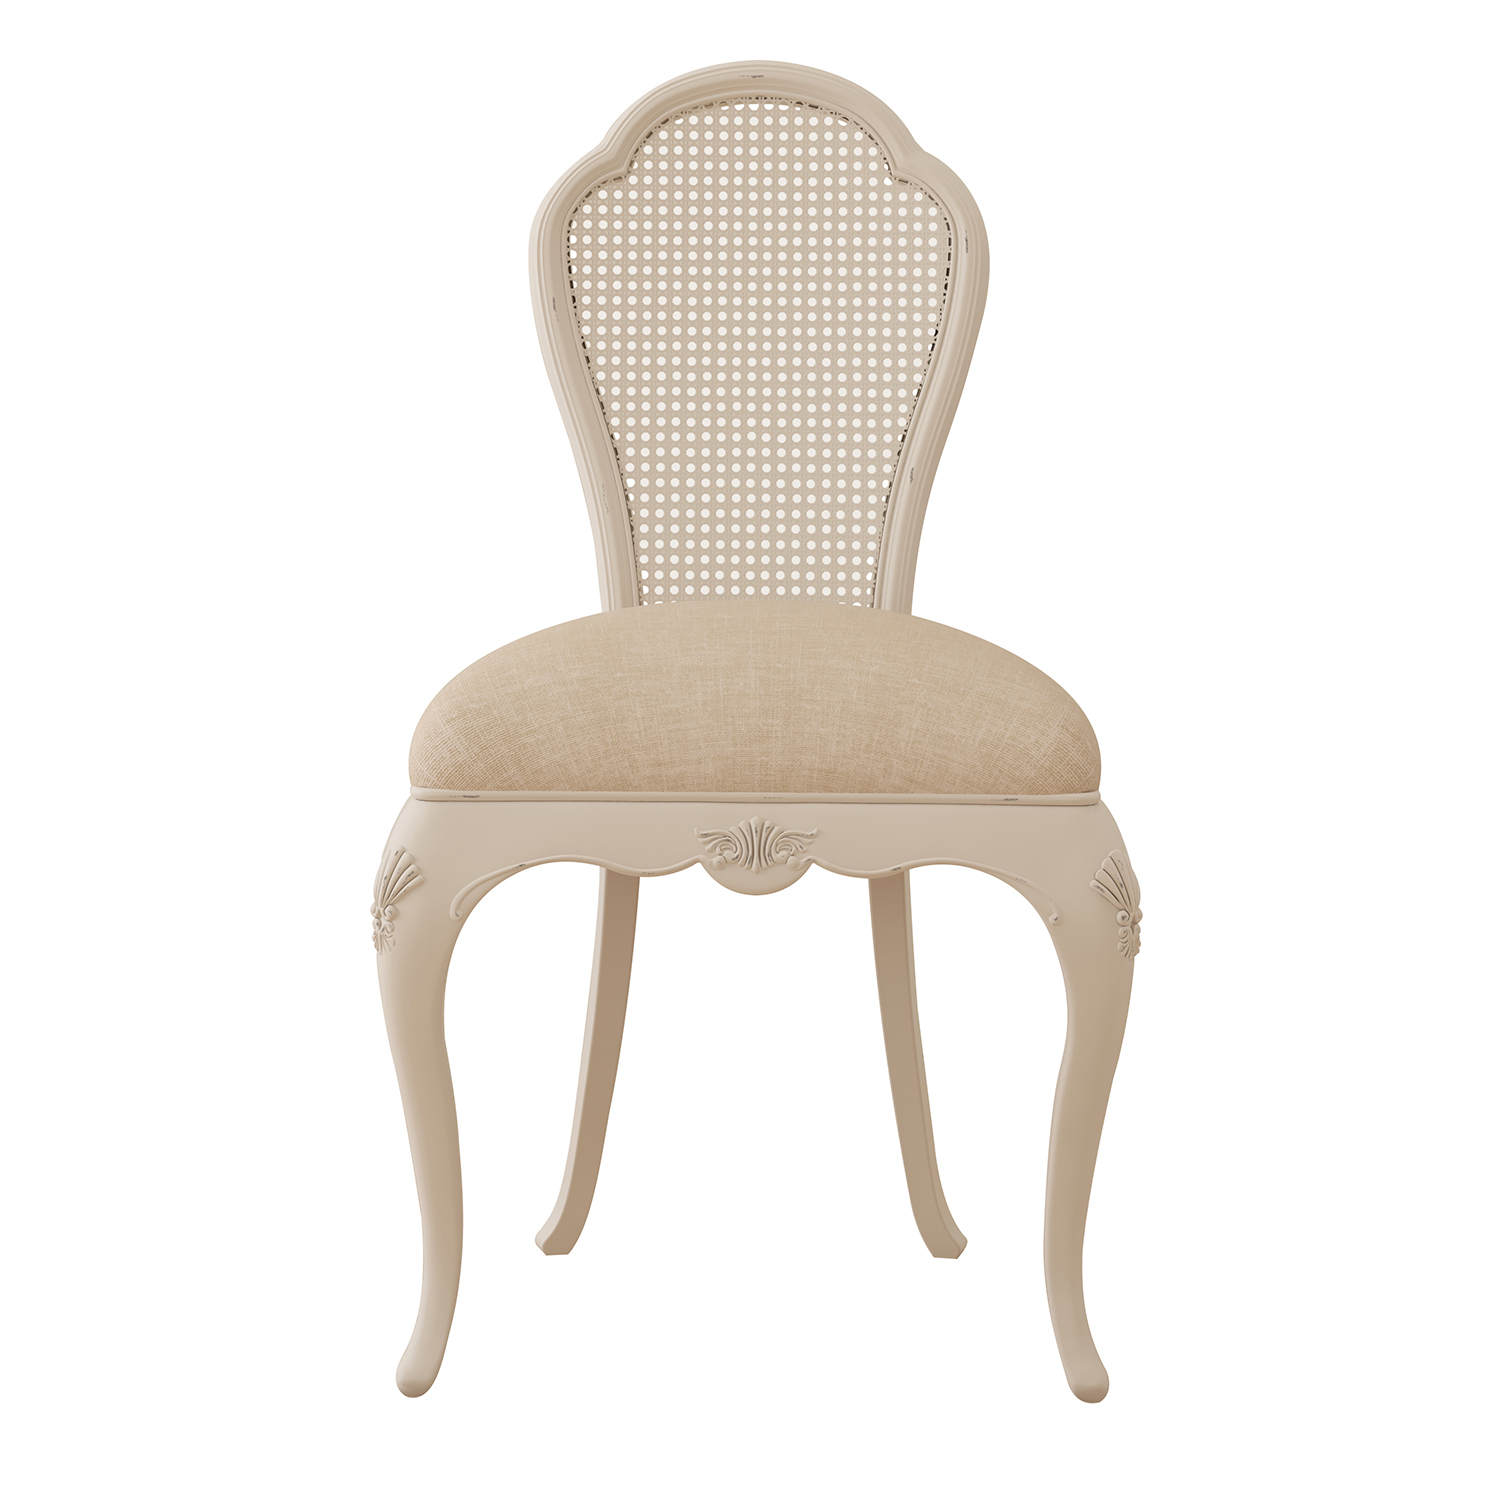 Willis & Gambier Ivory Chair